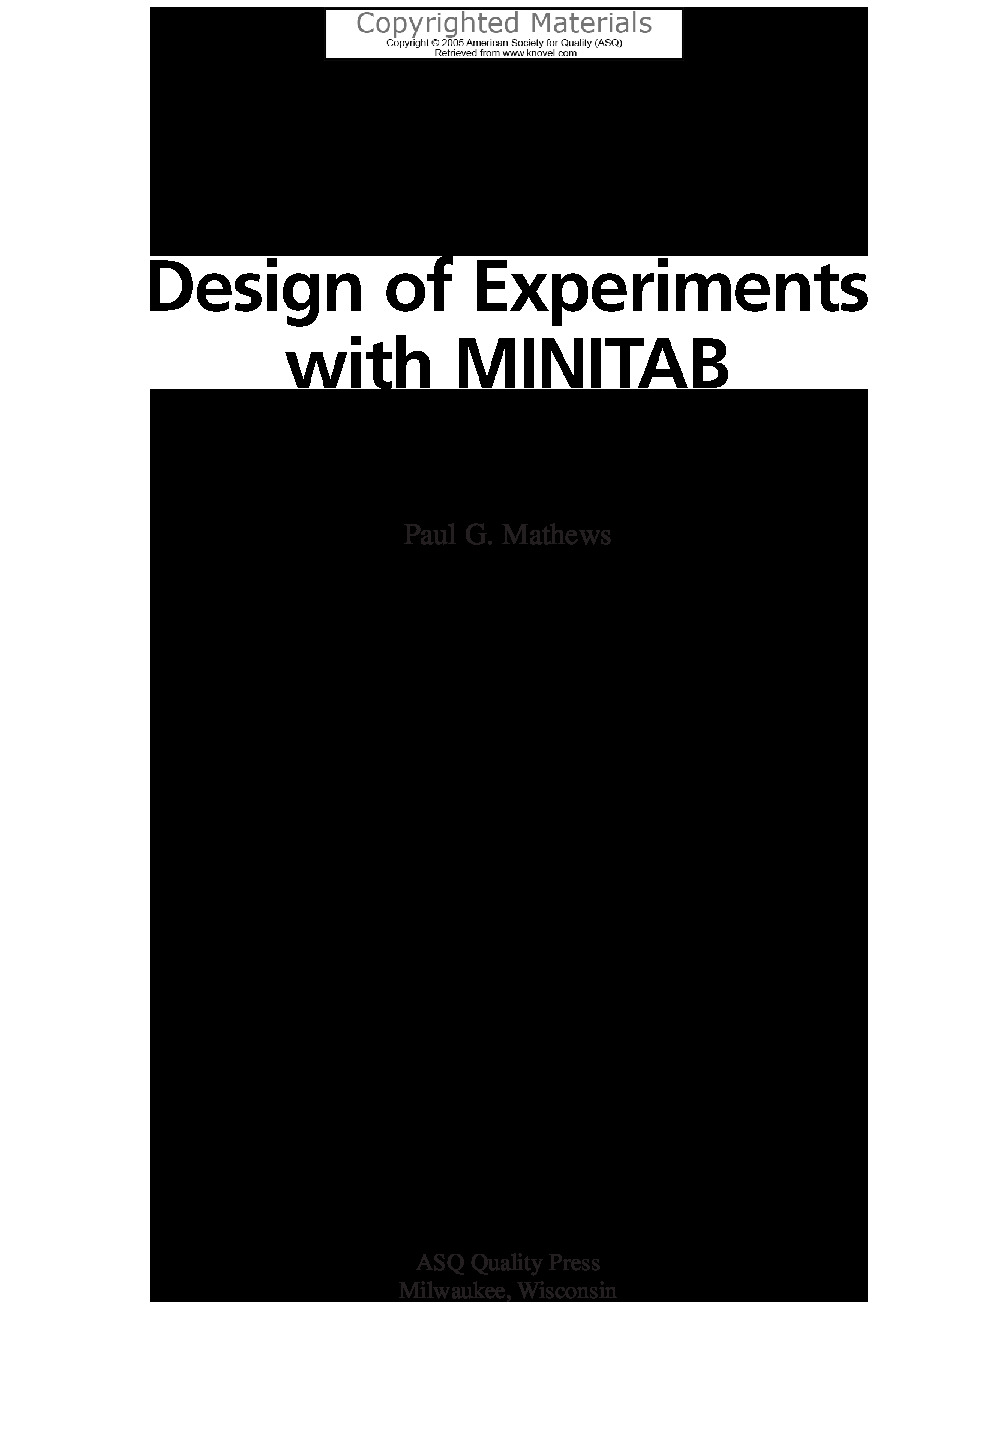 Design_of_Experiments_with_MINITAB